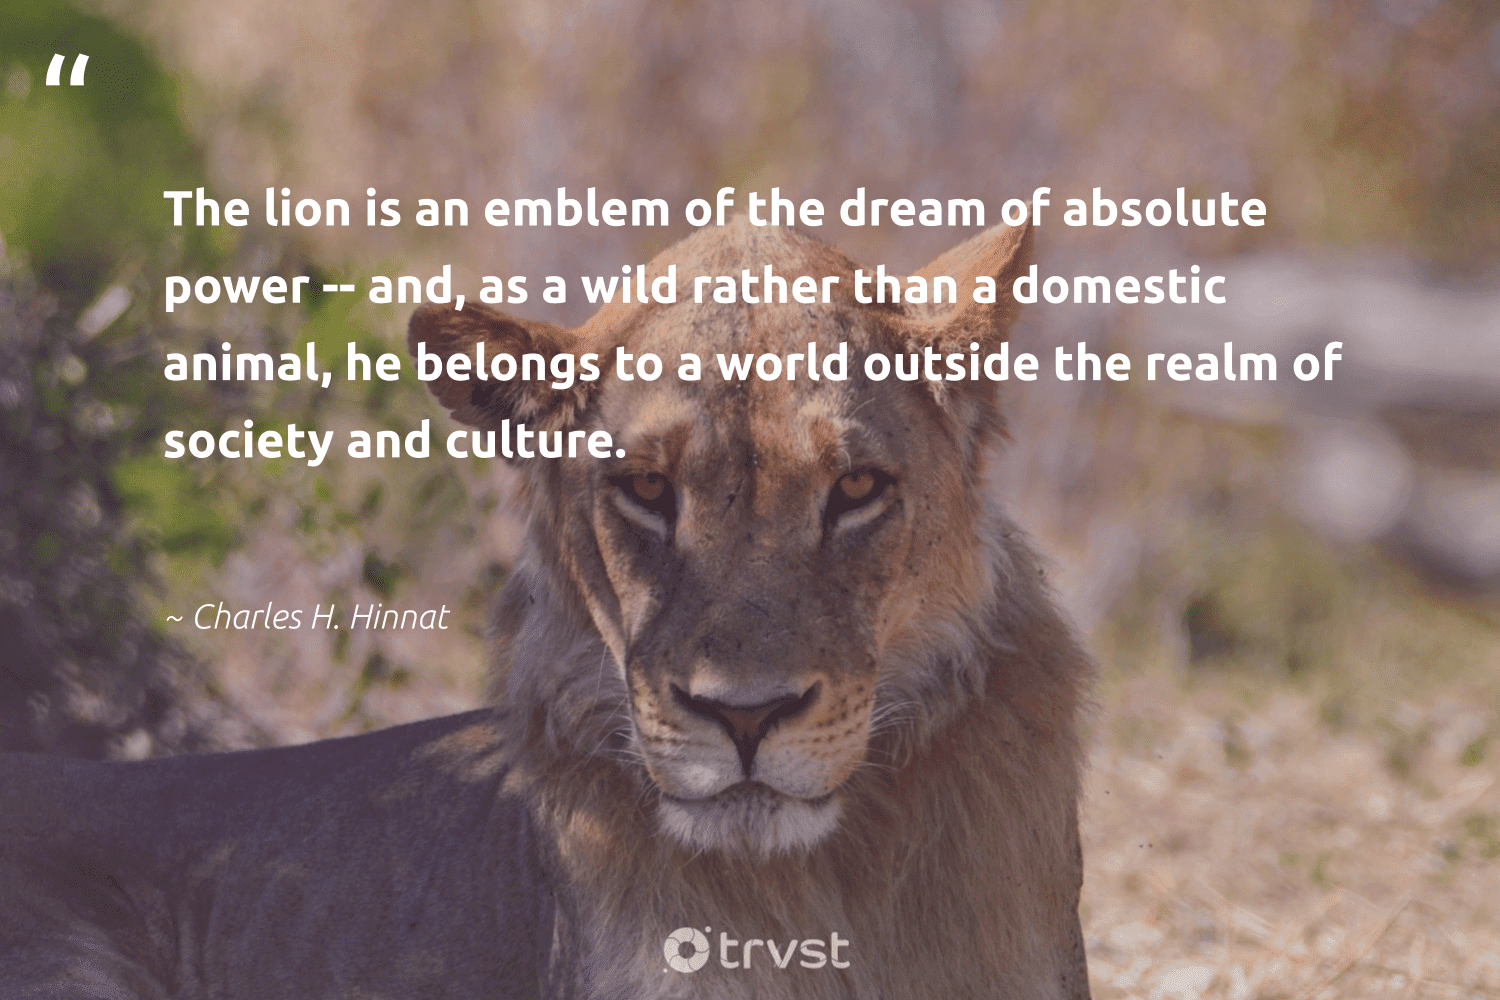 Lion Quotes - 42 Inspirational Lion Sayings & Famous Quotes